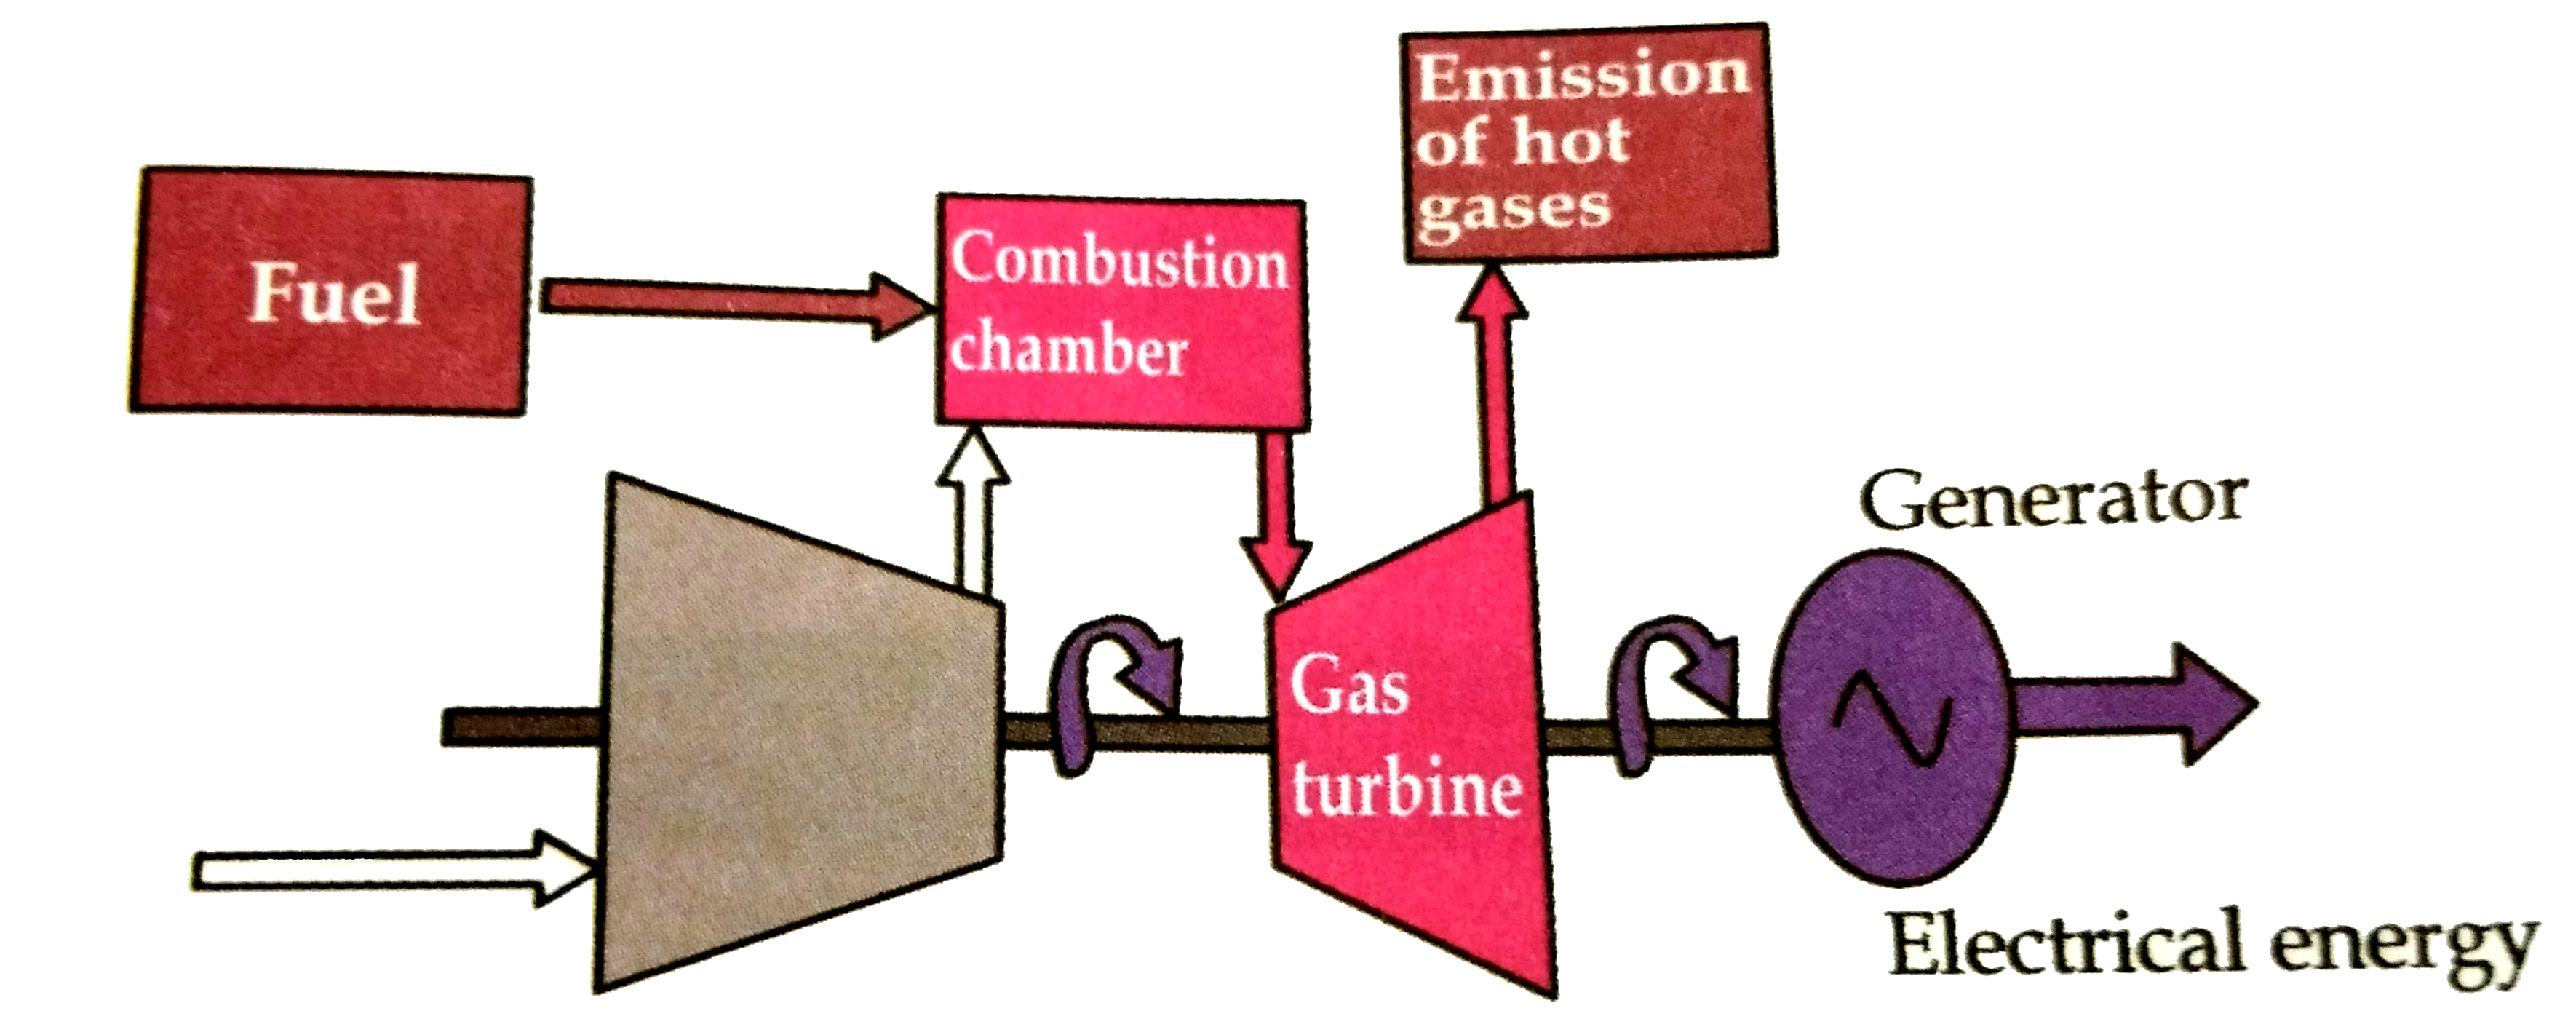 Which energy is produced?